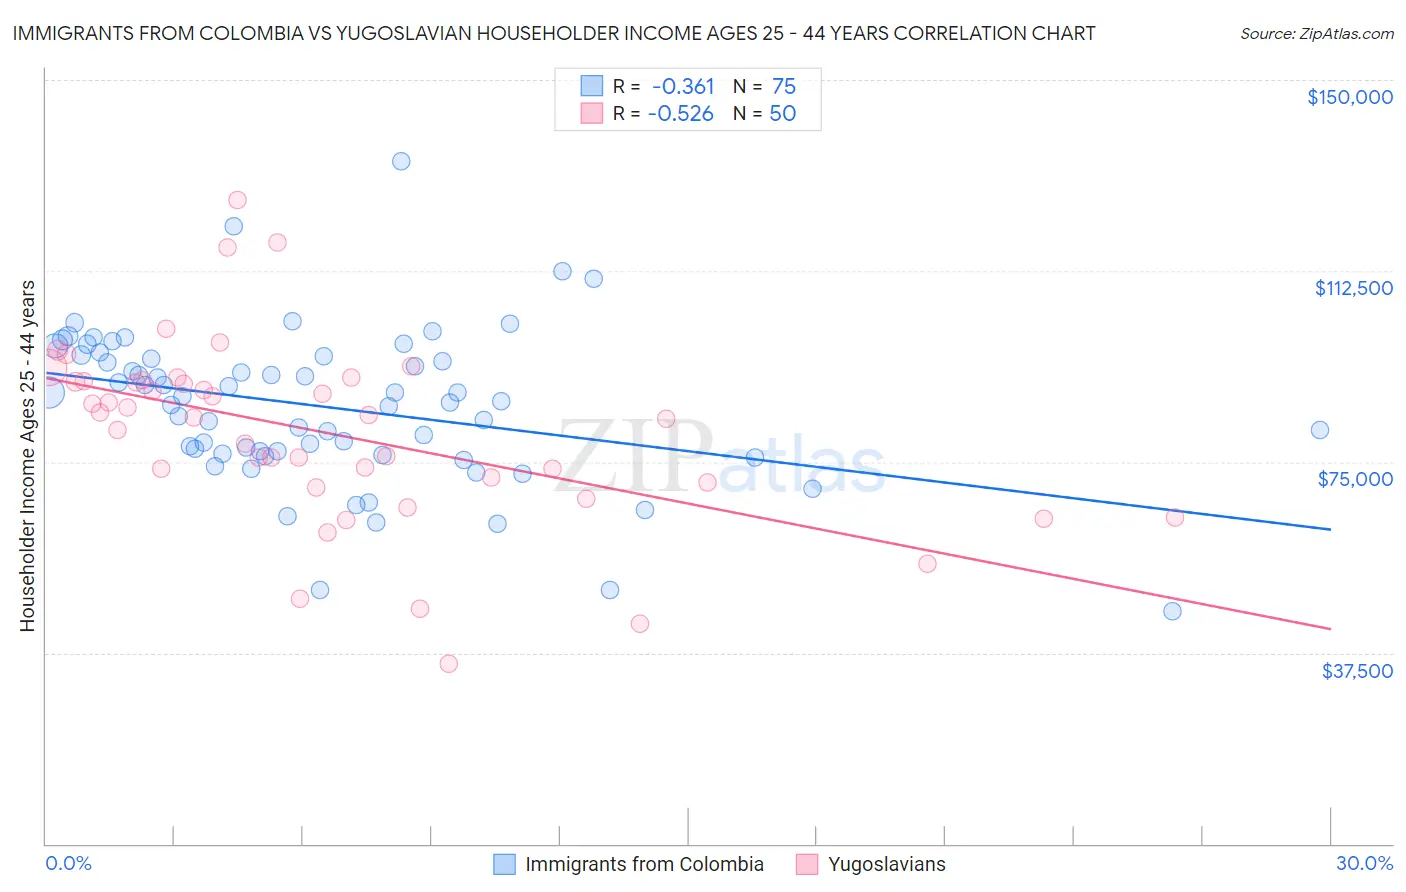 Immigrants from Colombia vs Yugoslavian Householder Income Ages 25 - 44 years